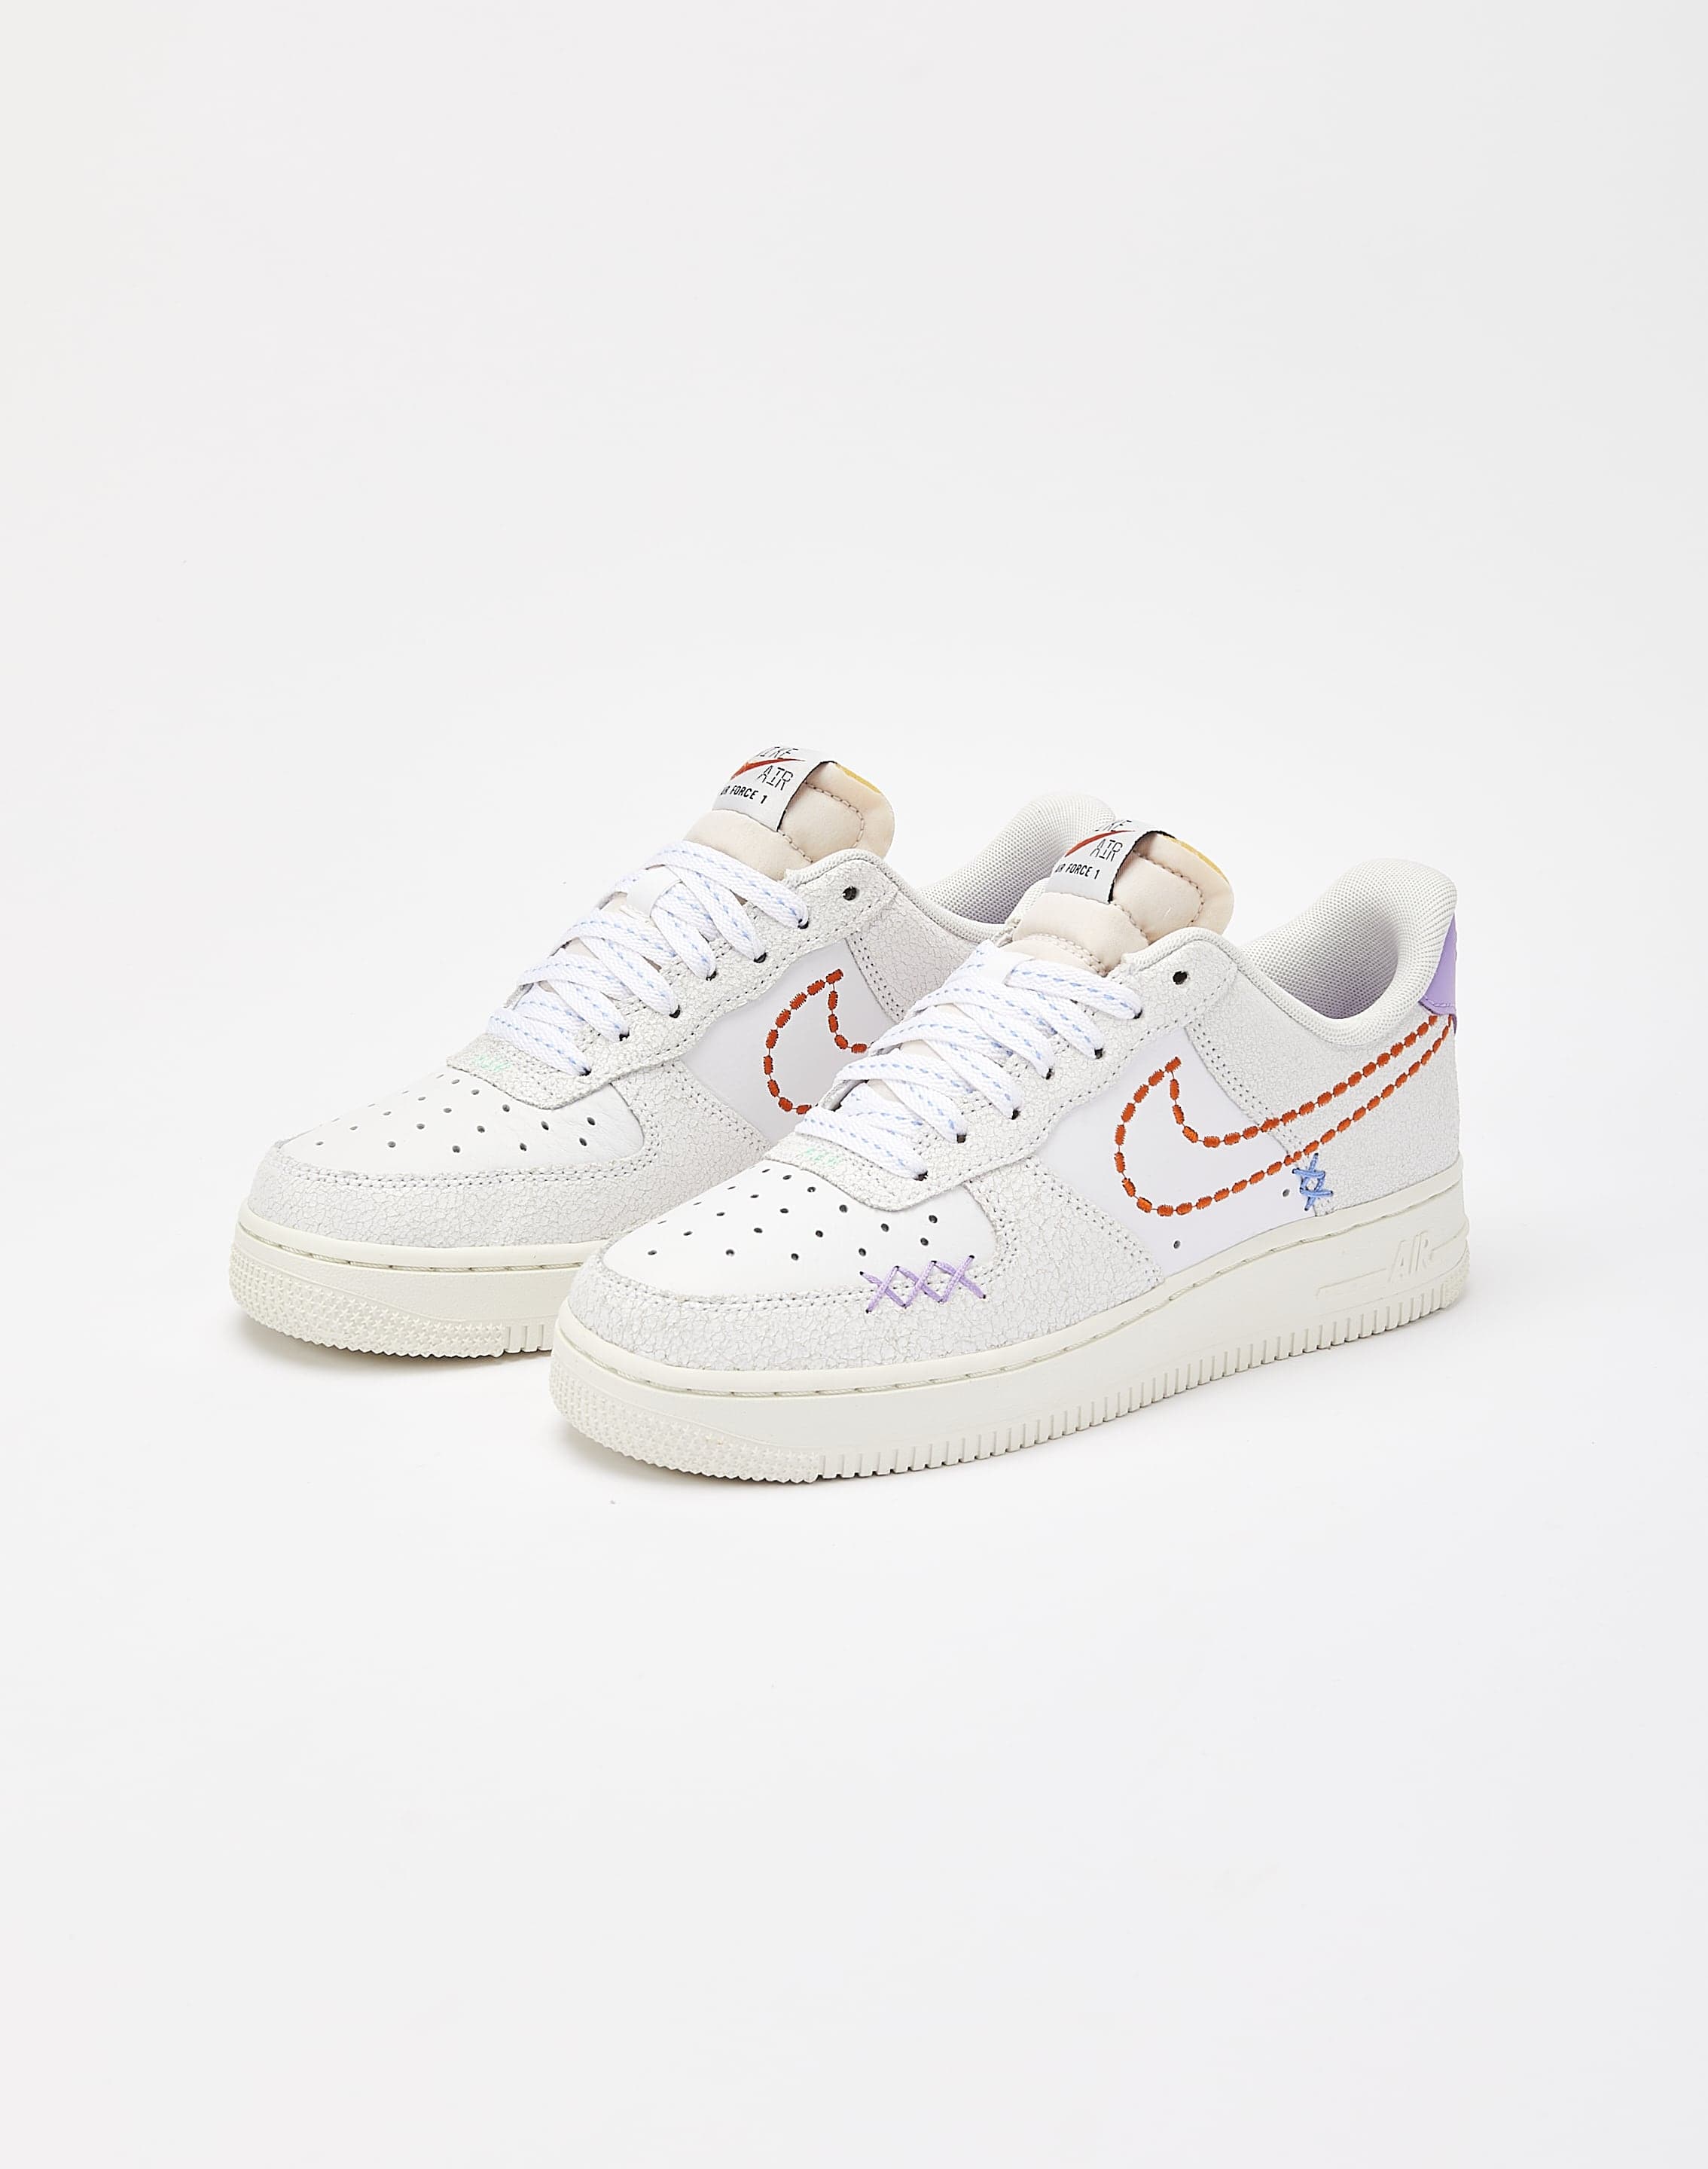 Nike Women's Air Force 1 '07 SE Shoes in White, Size: 10 | DX2348-100